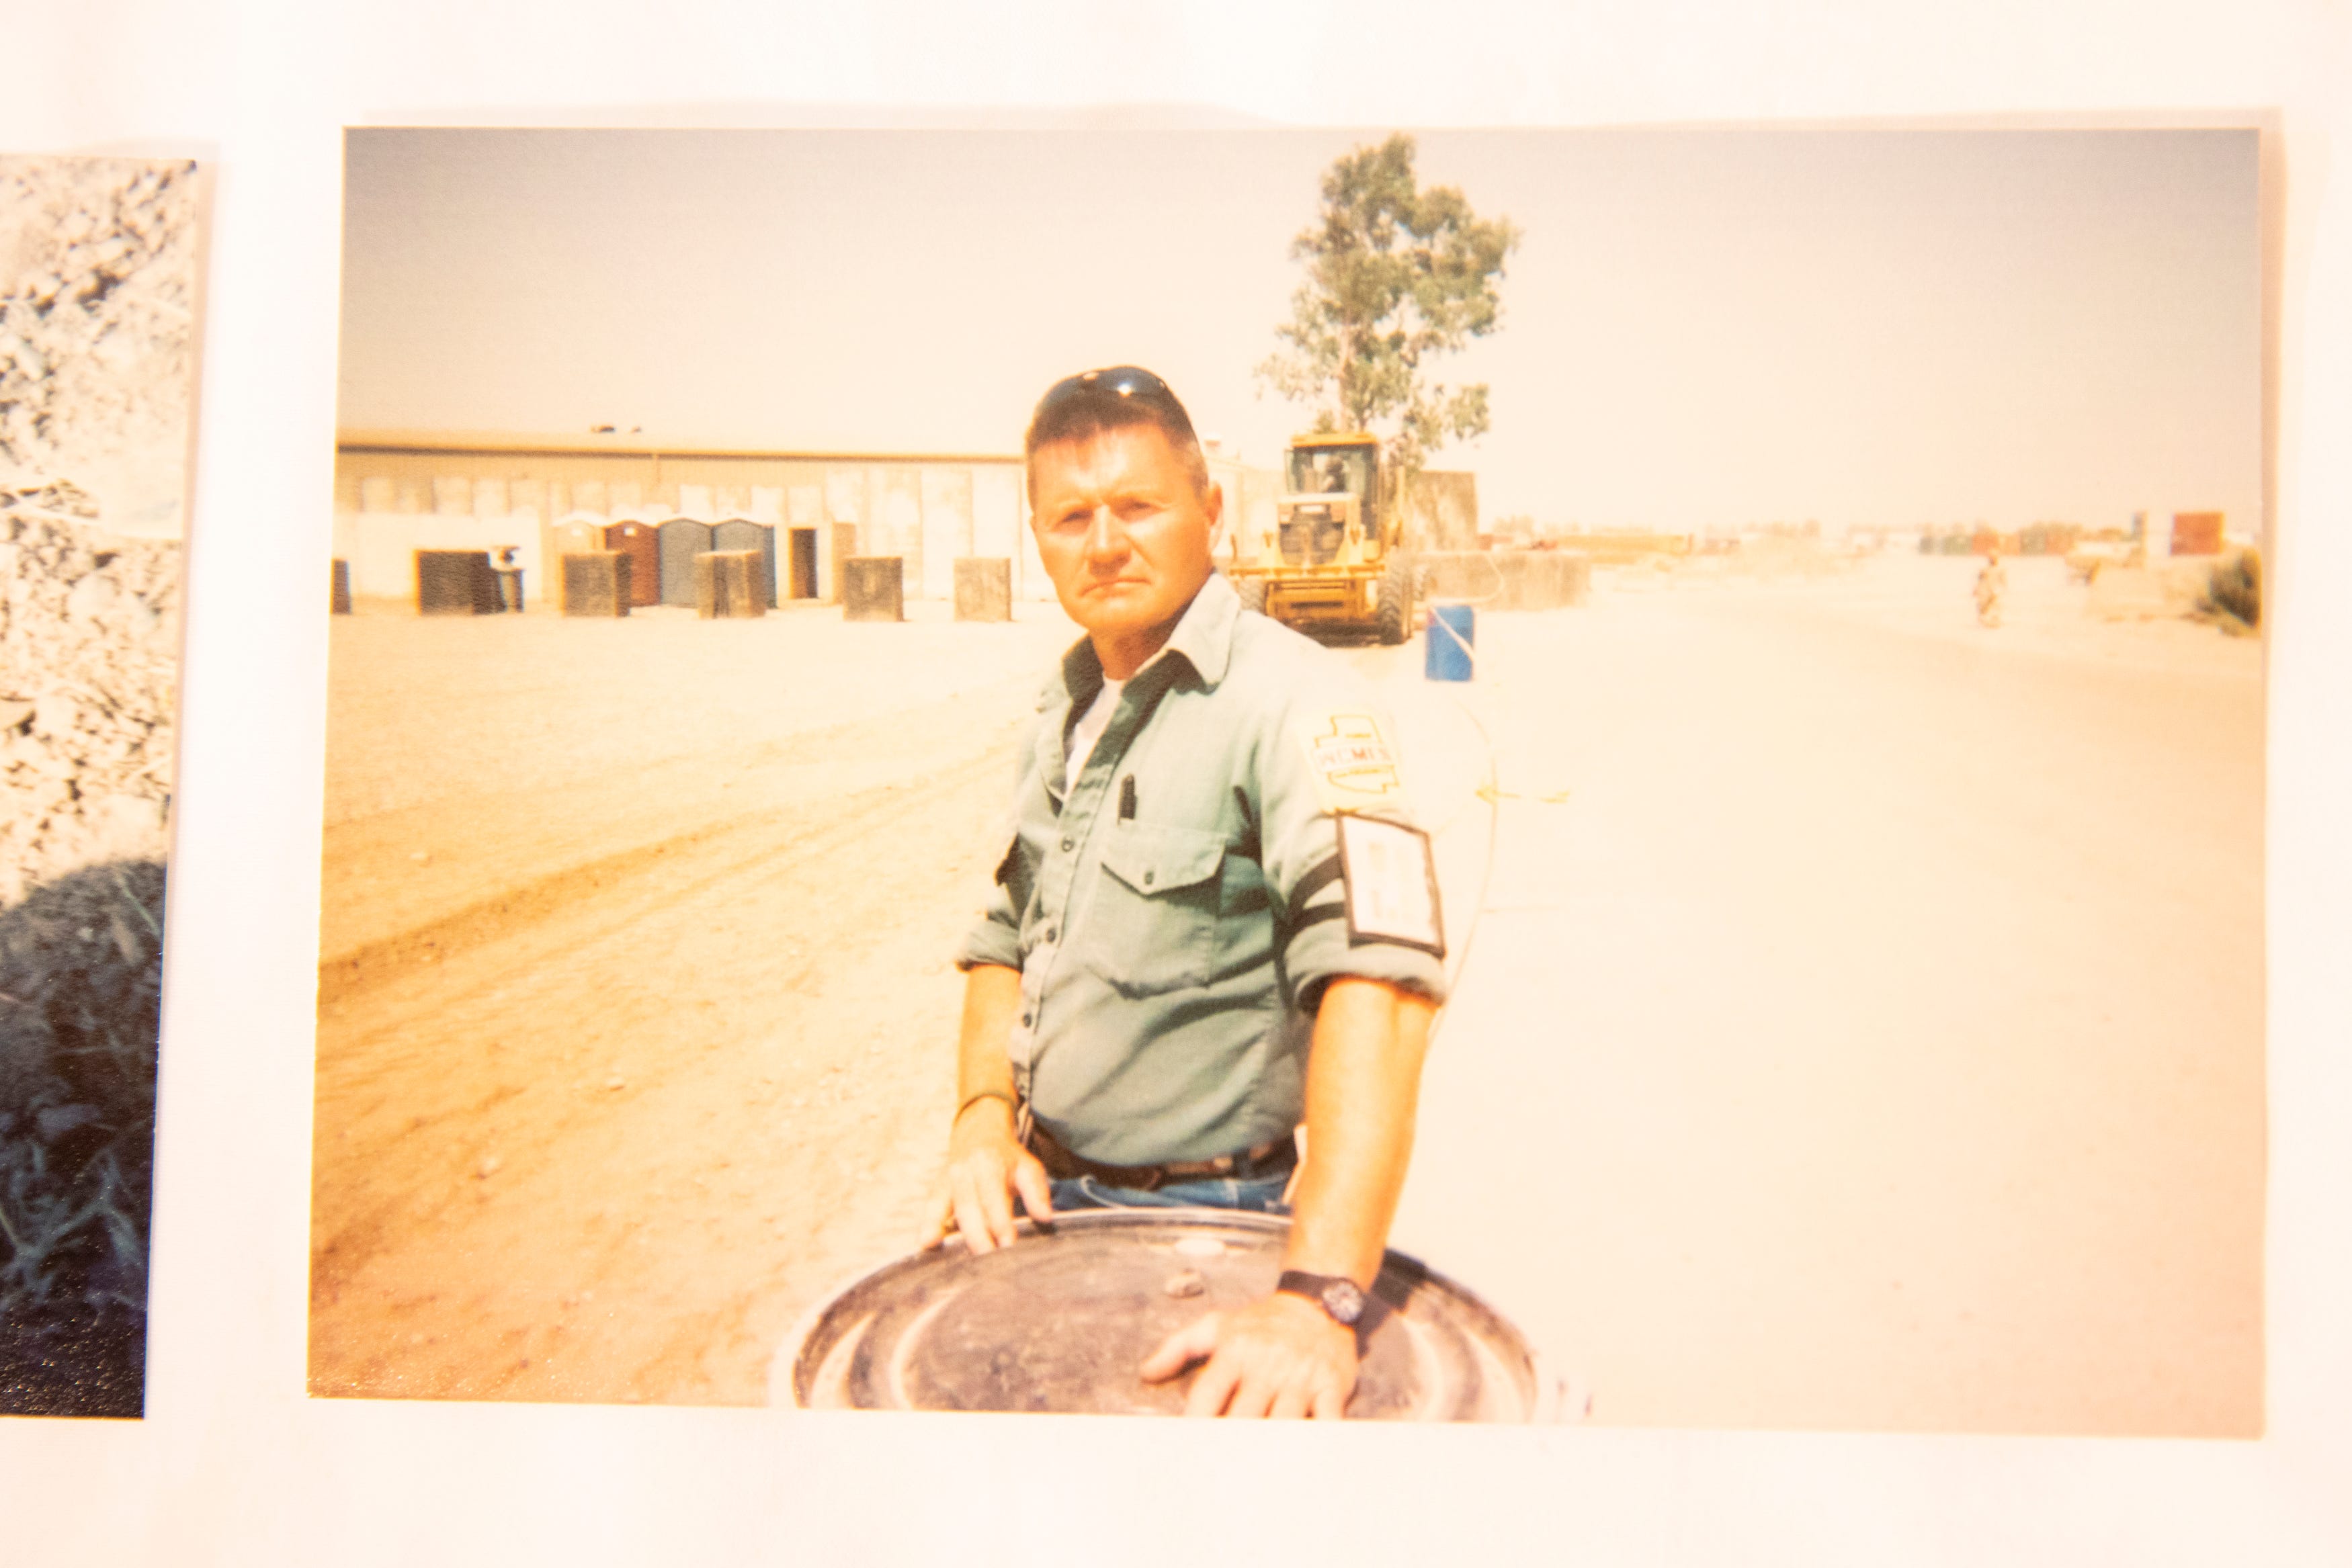 A photo from Mark McAlister's first trip to Iraq in 2005 working as a private defense contractor.